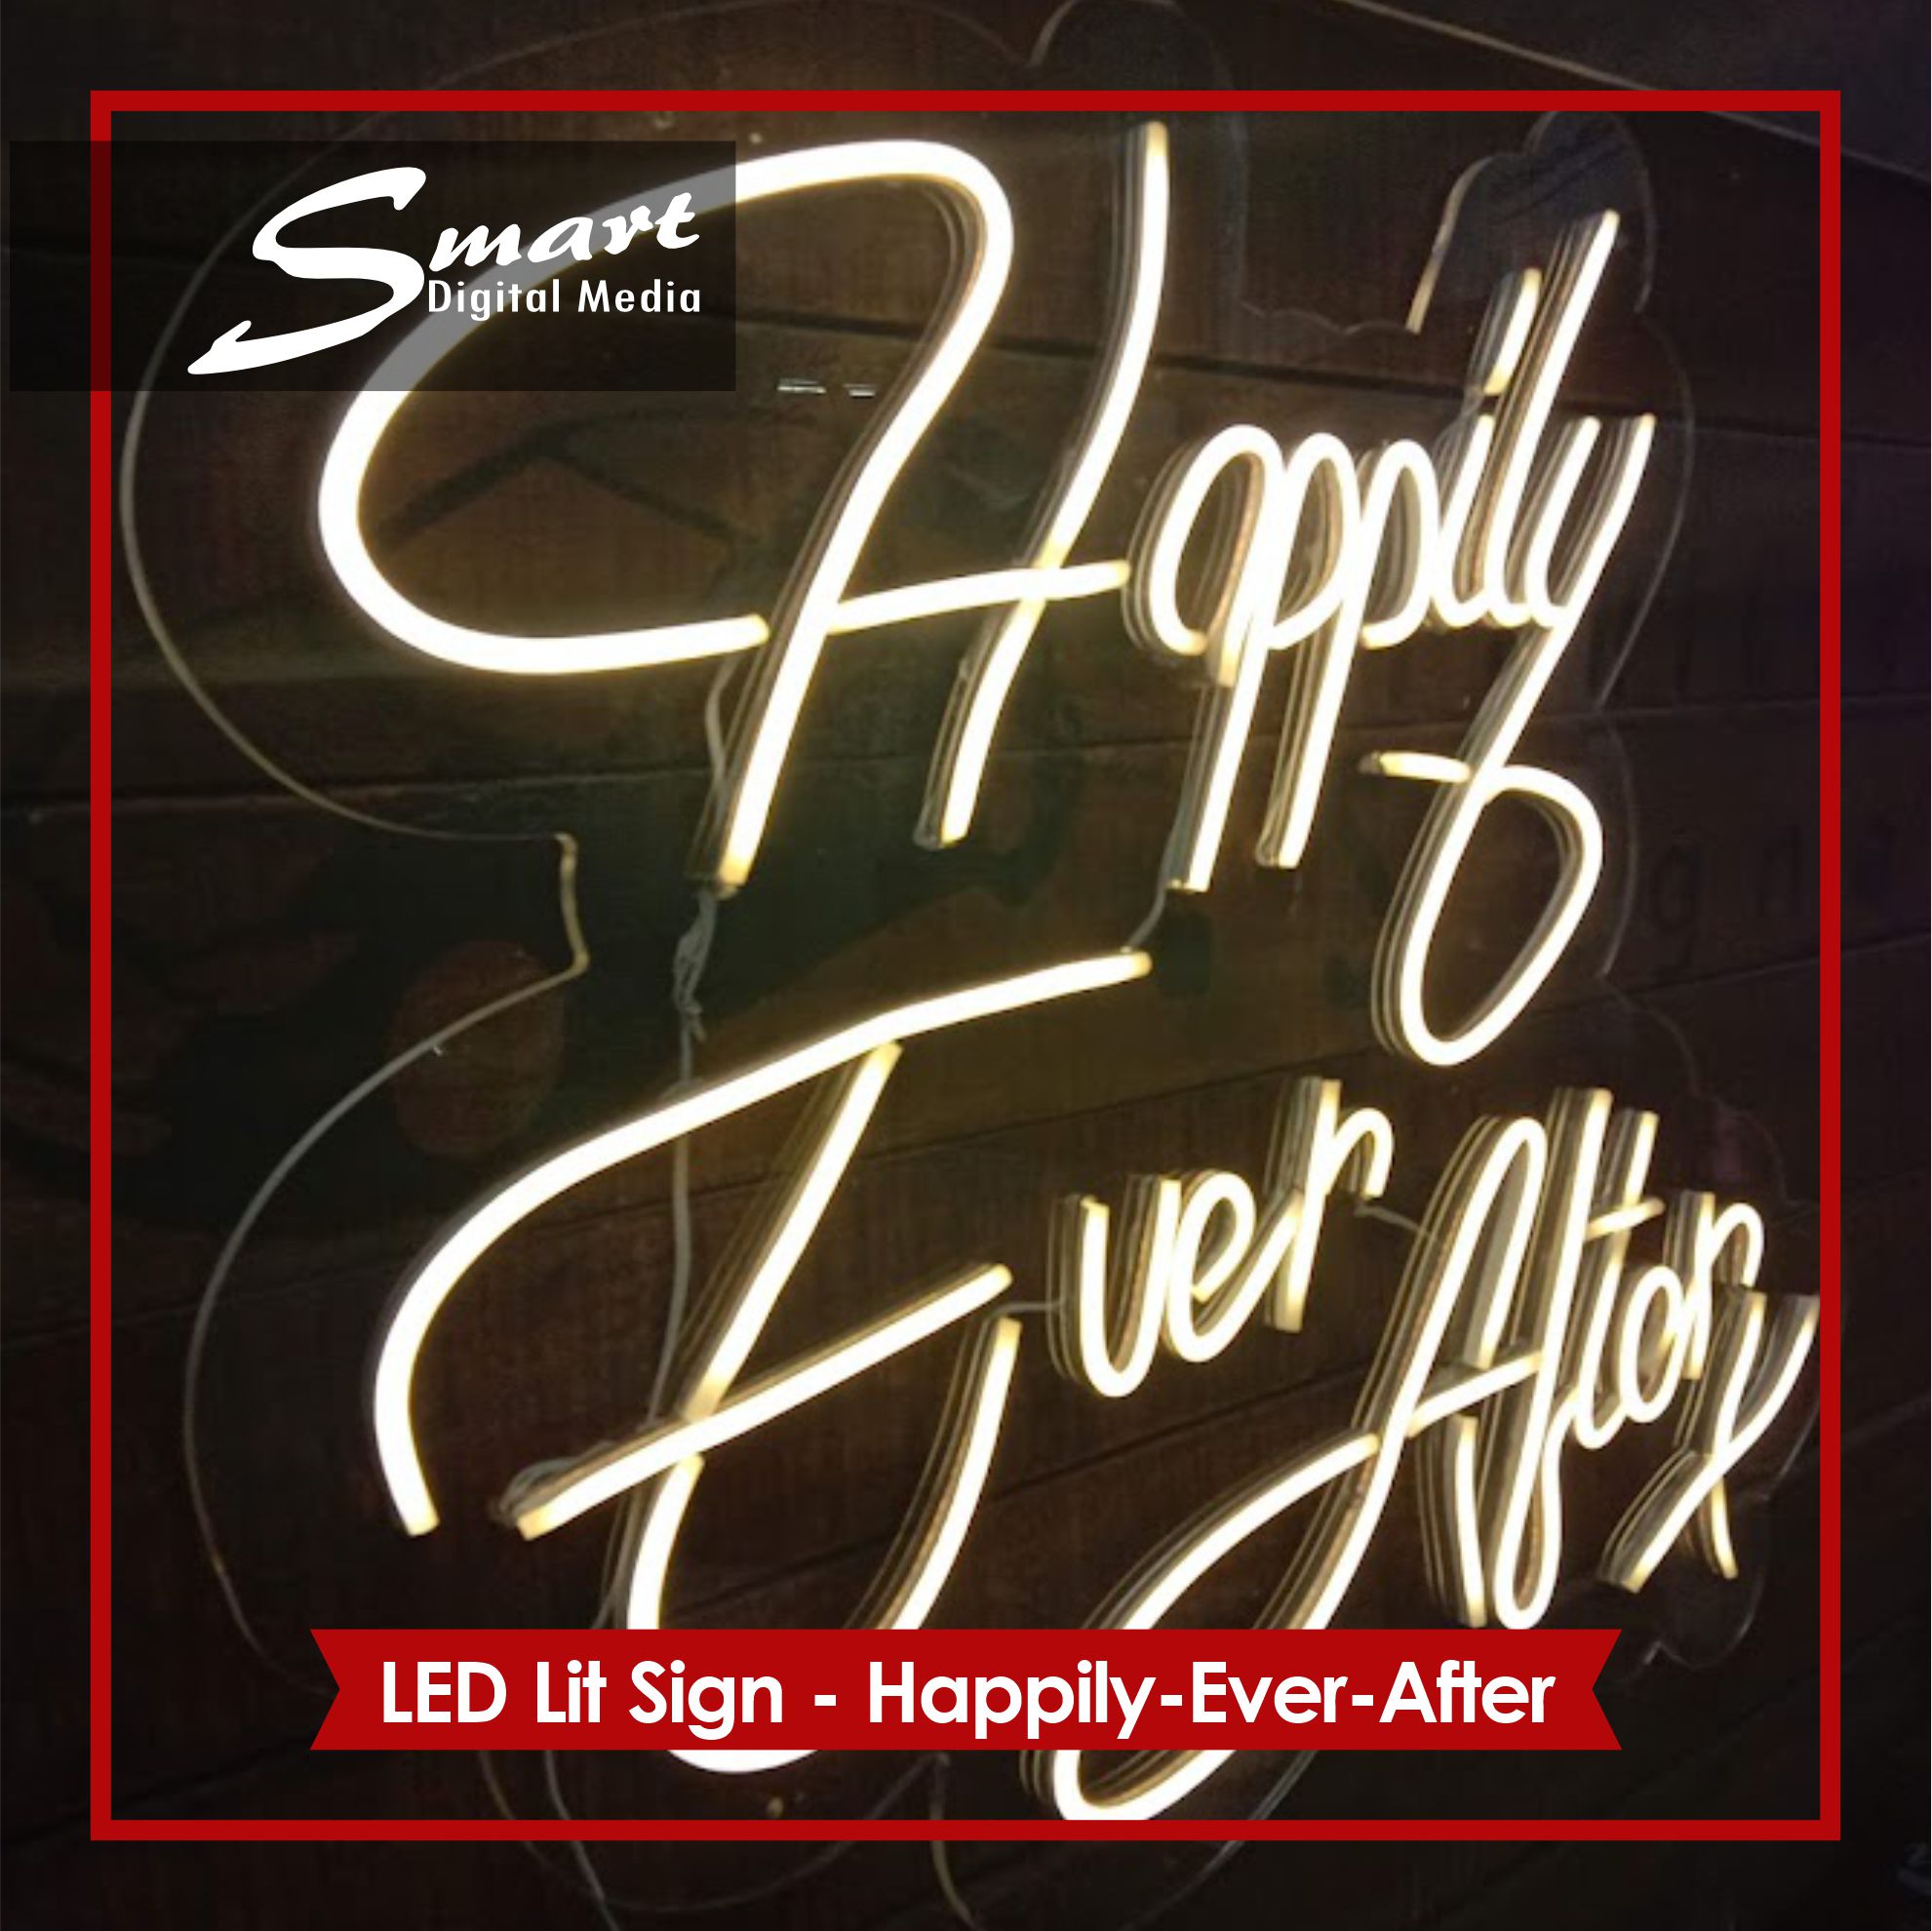 Happily Ever After, warm white LED Light, custom made by Smart Digital Media in Paarl made from energy-saving and safe neon flex tubing.